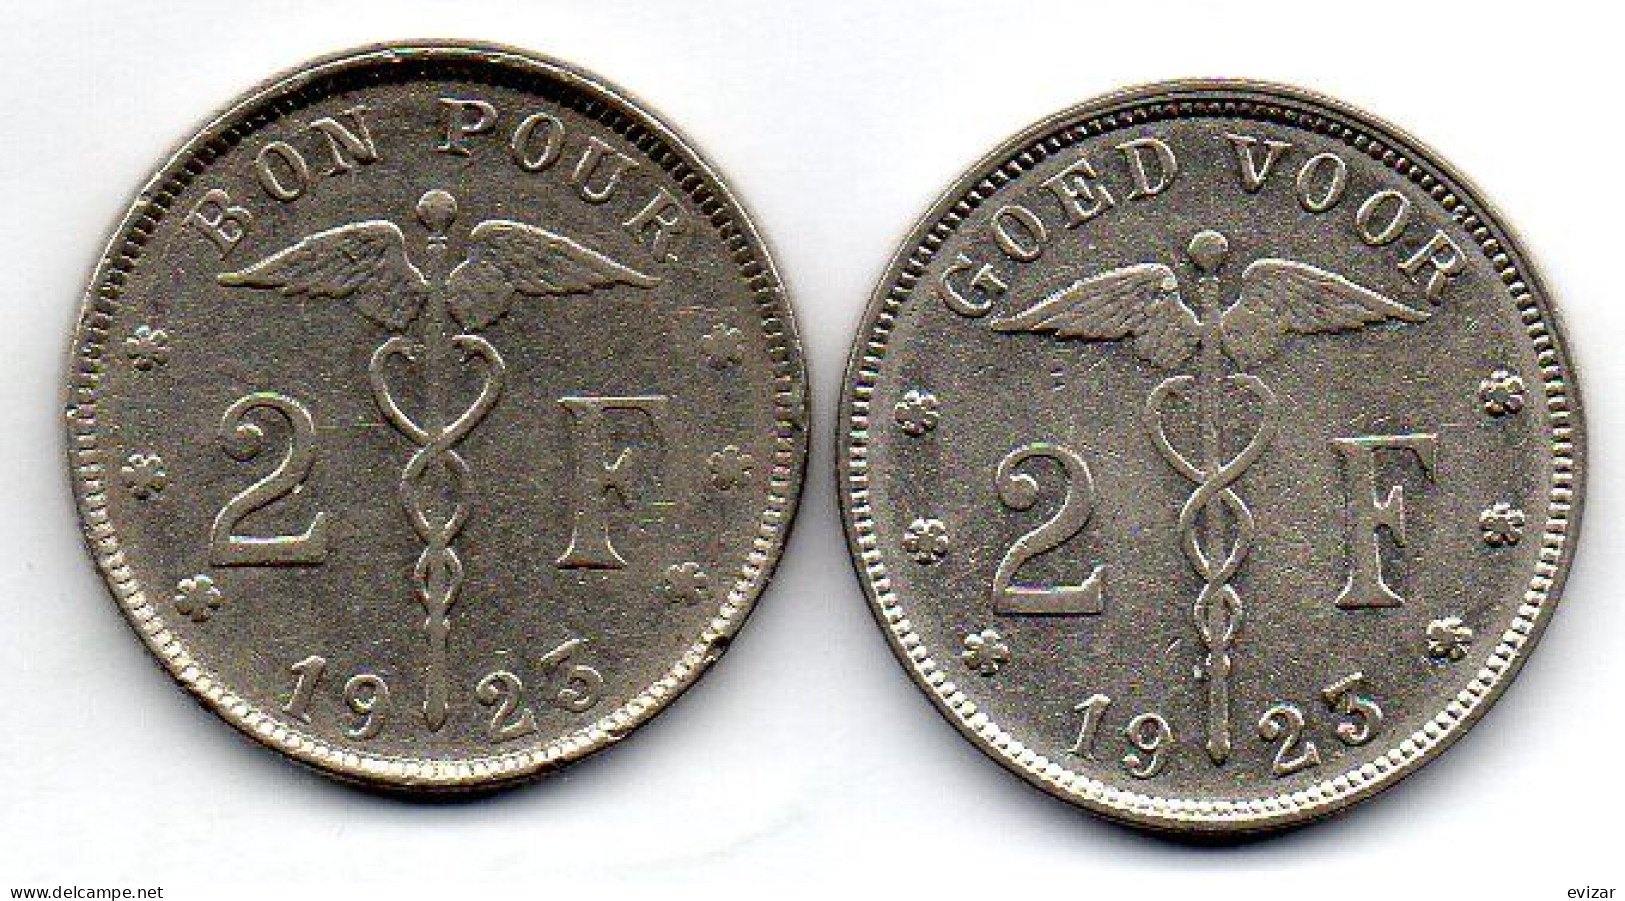 BELGIUM - Set Of Two Coins 2 Francs, Nickel, Year 1923, KM # 91.1, 92, French & Dutch Legend - 2 Francs